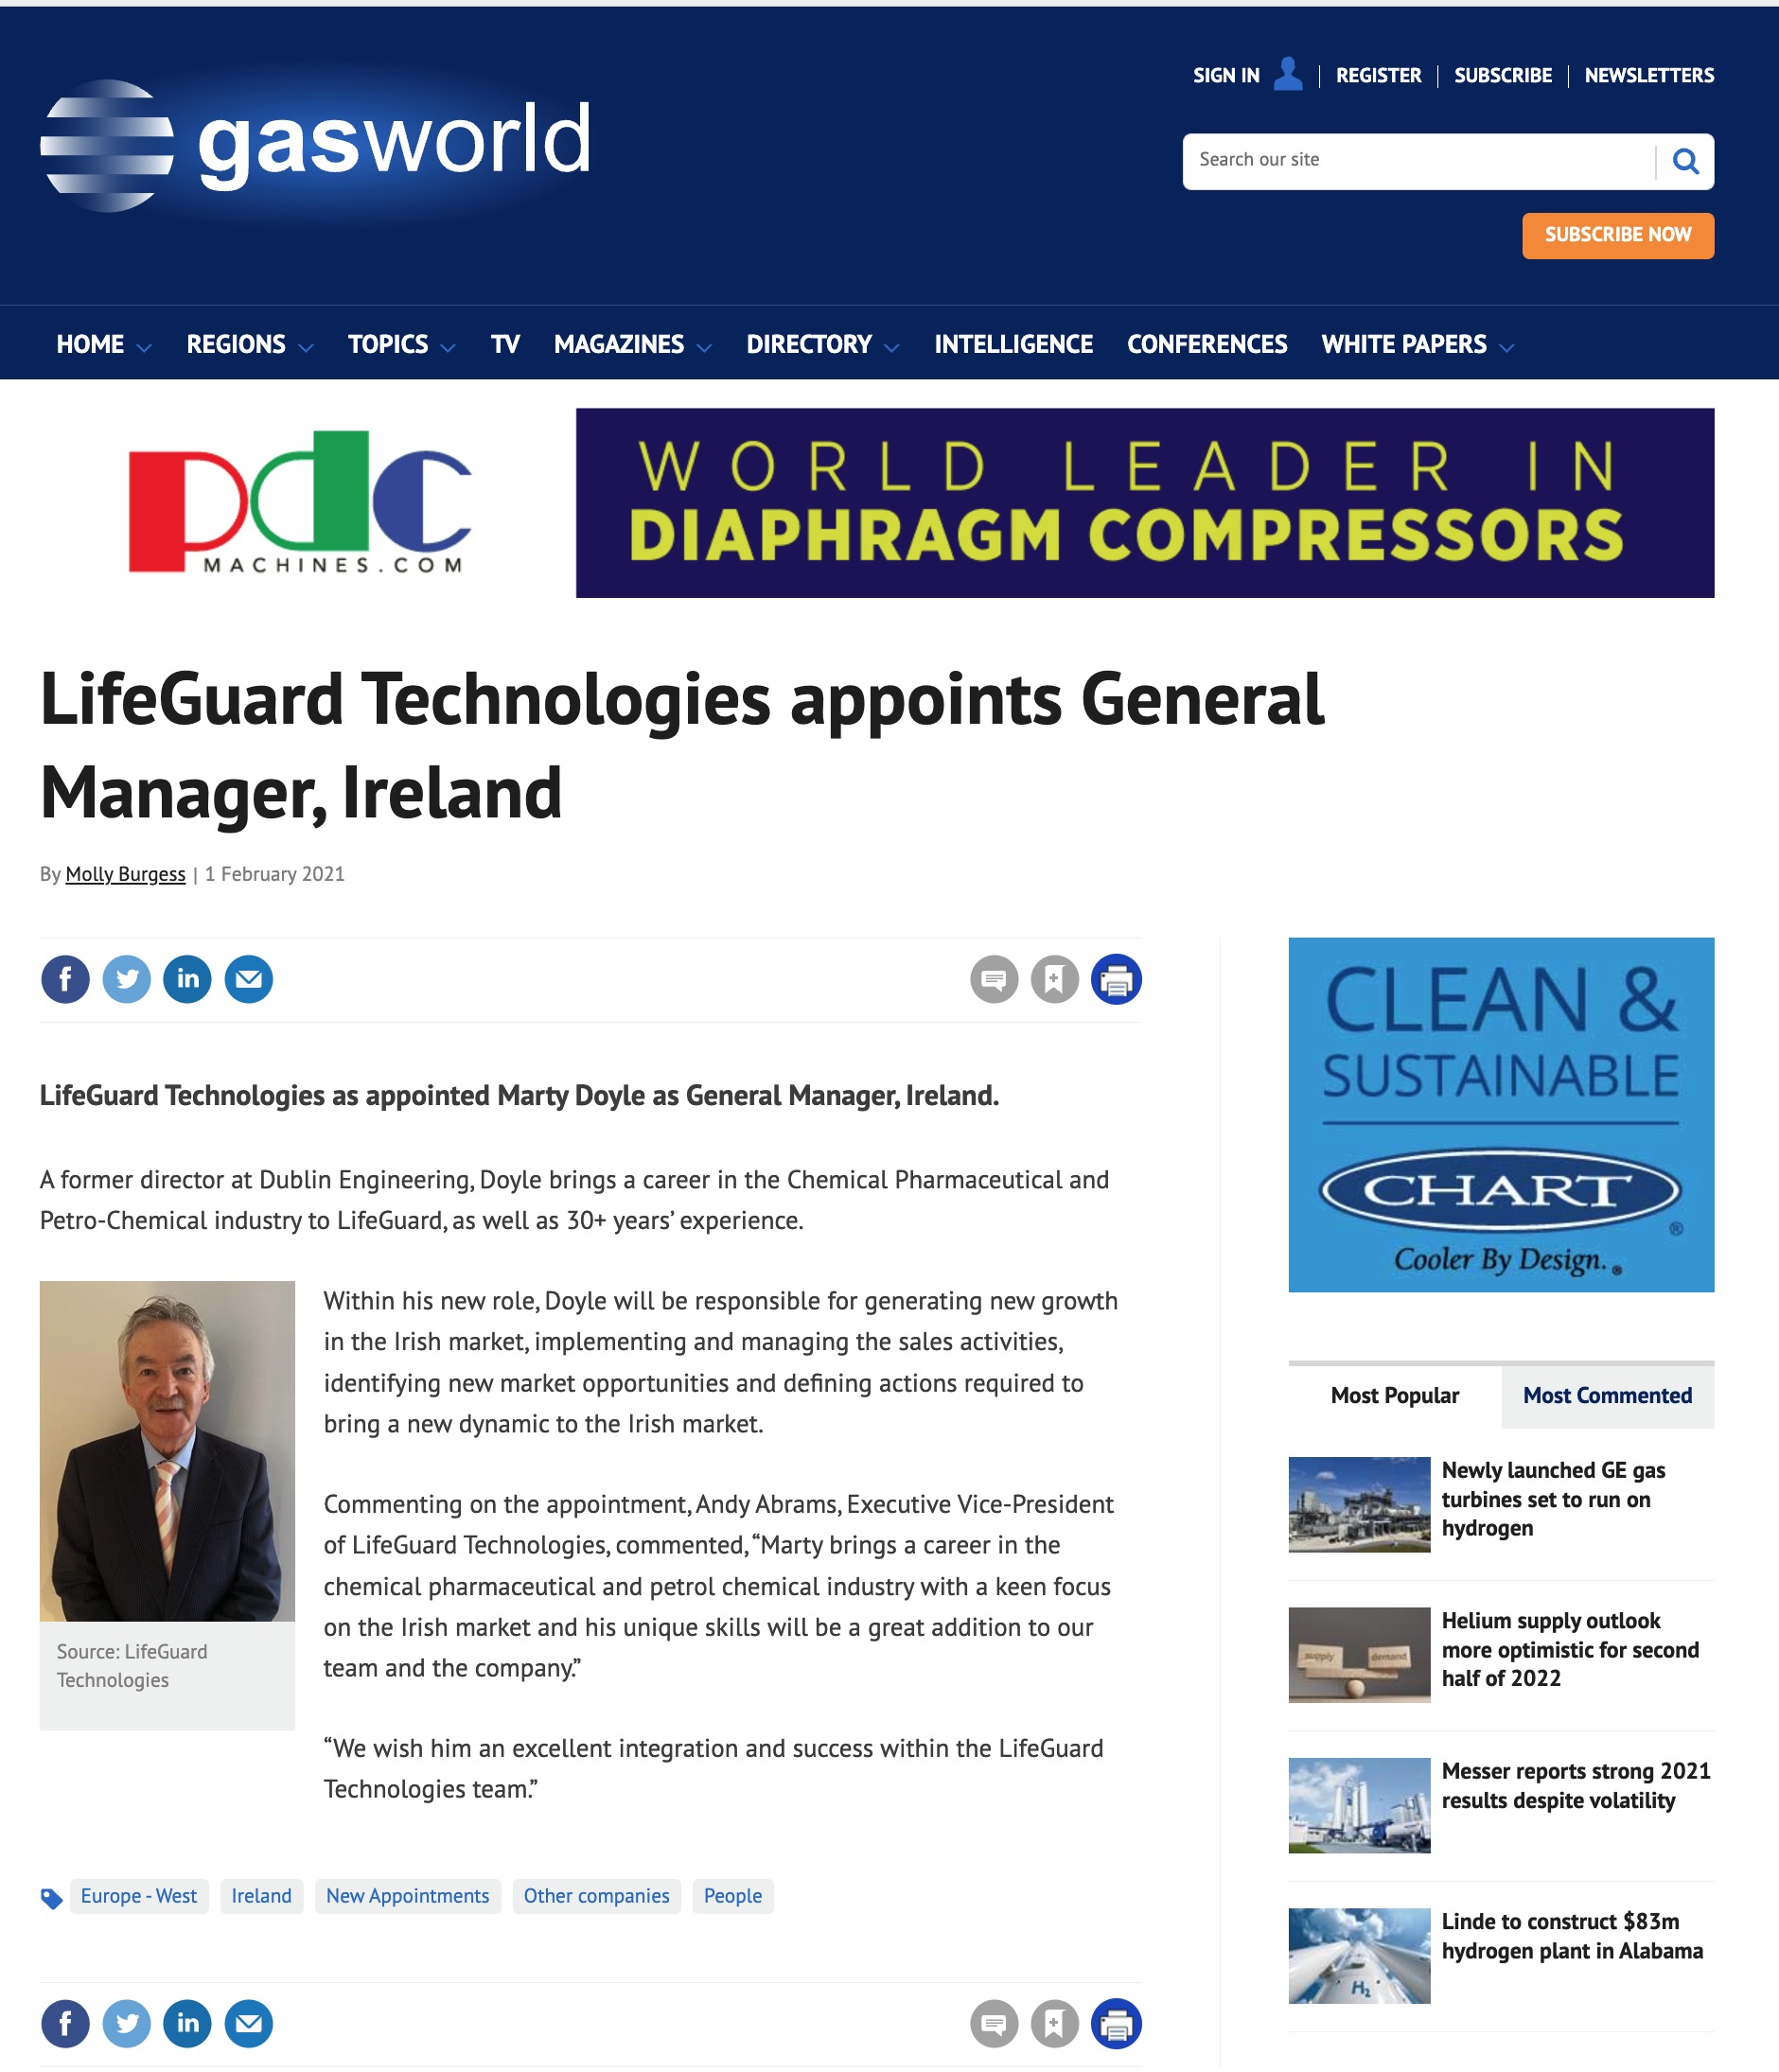 LifeGuard Technologies appoints General Manager, Ireland